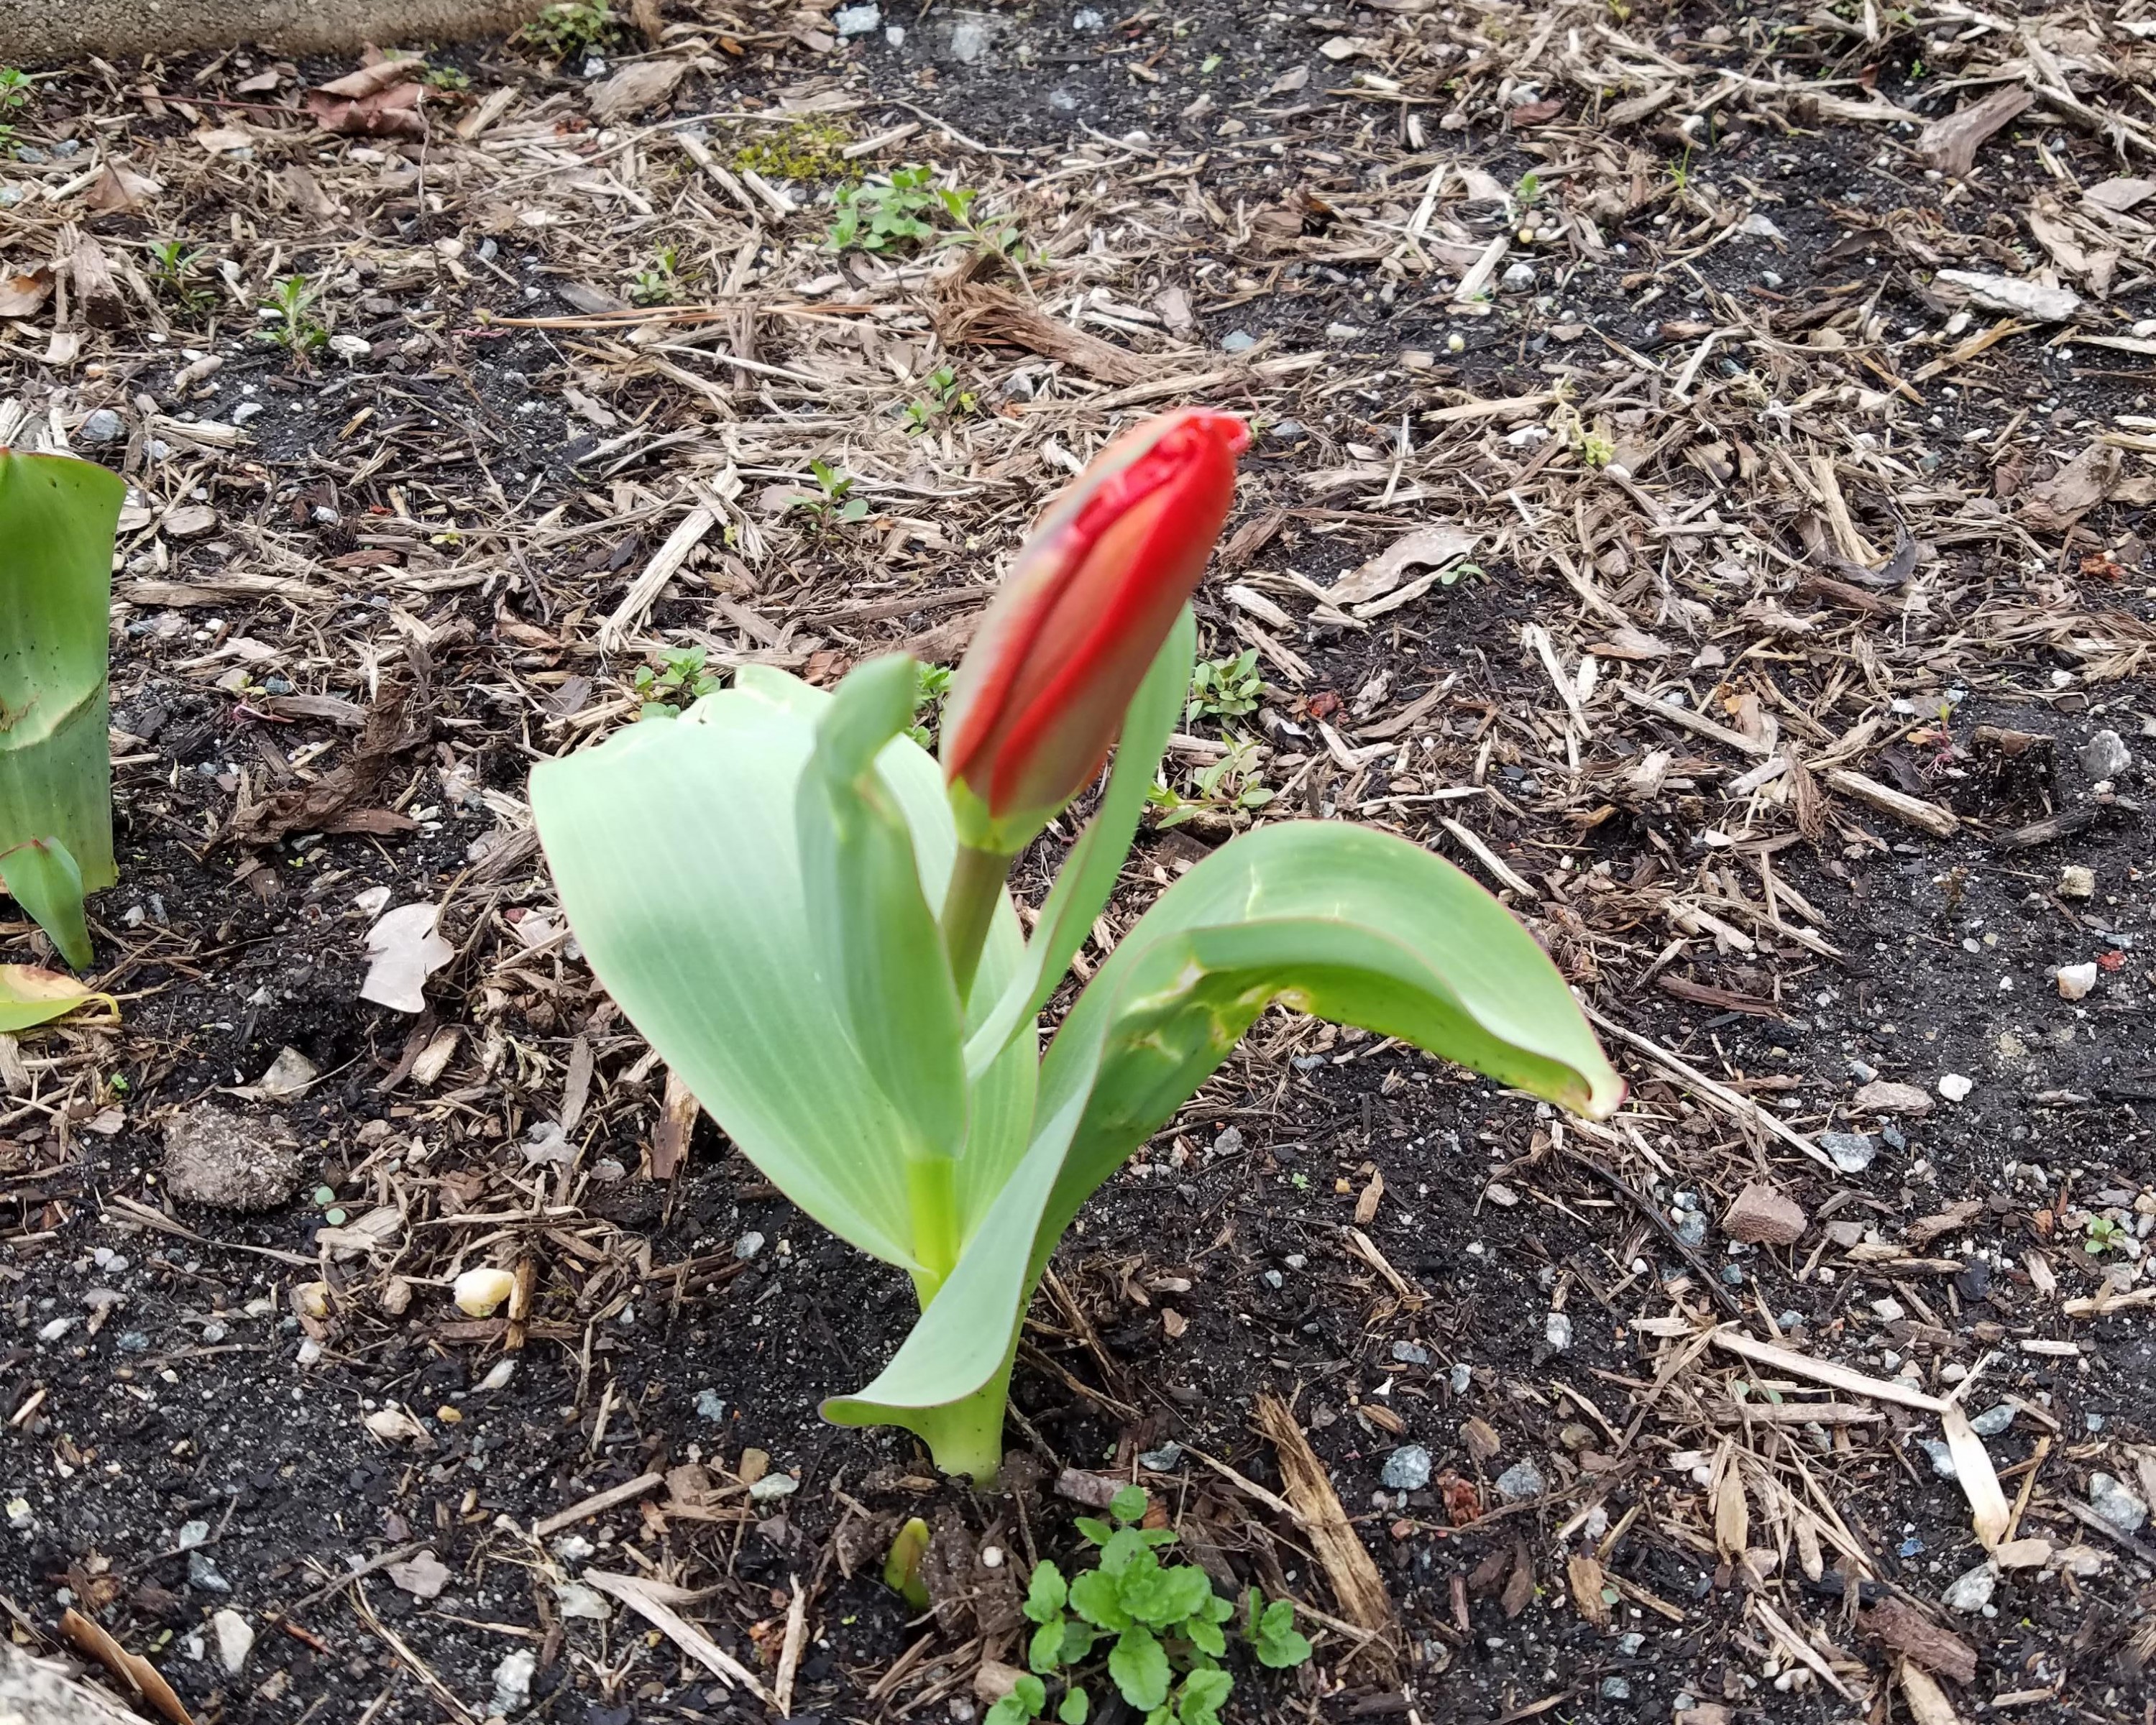 Tulip ready to bloom